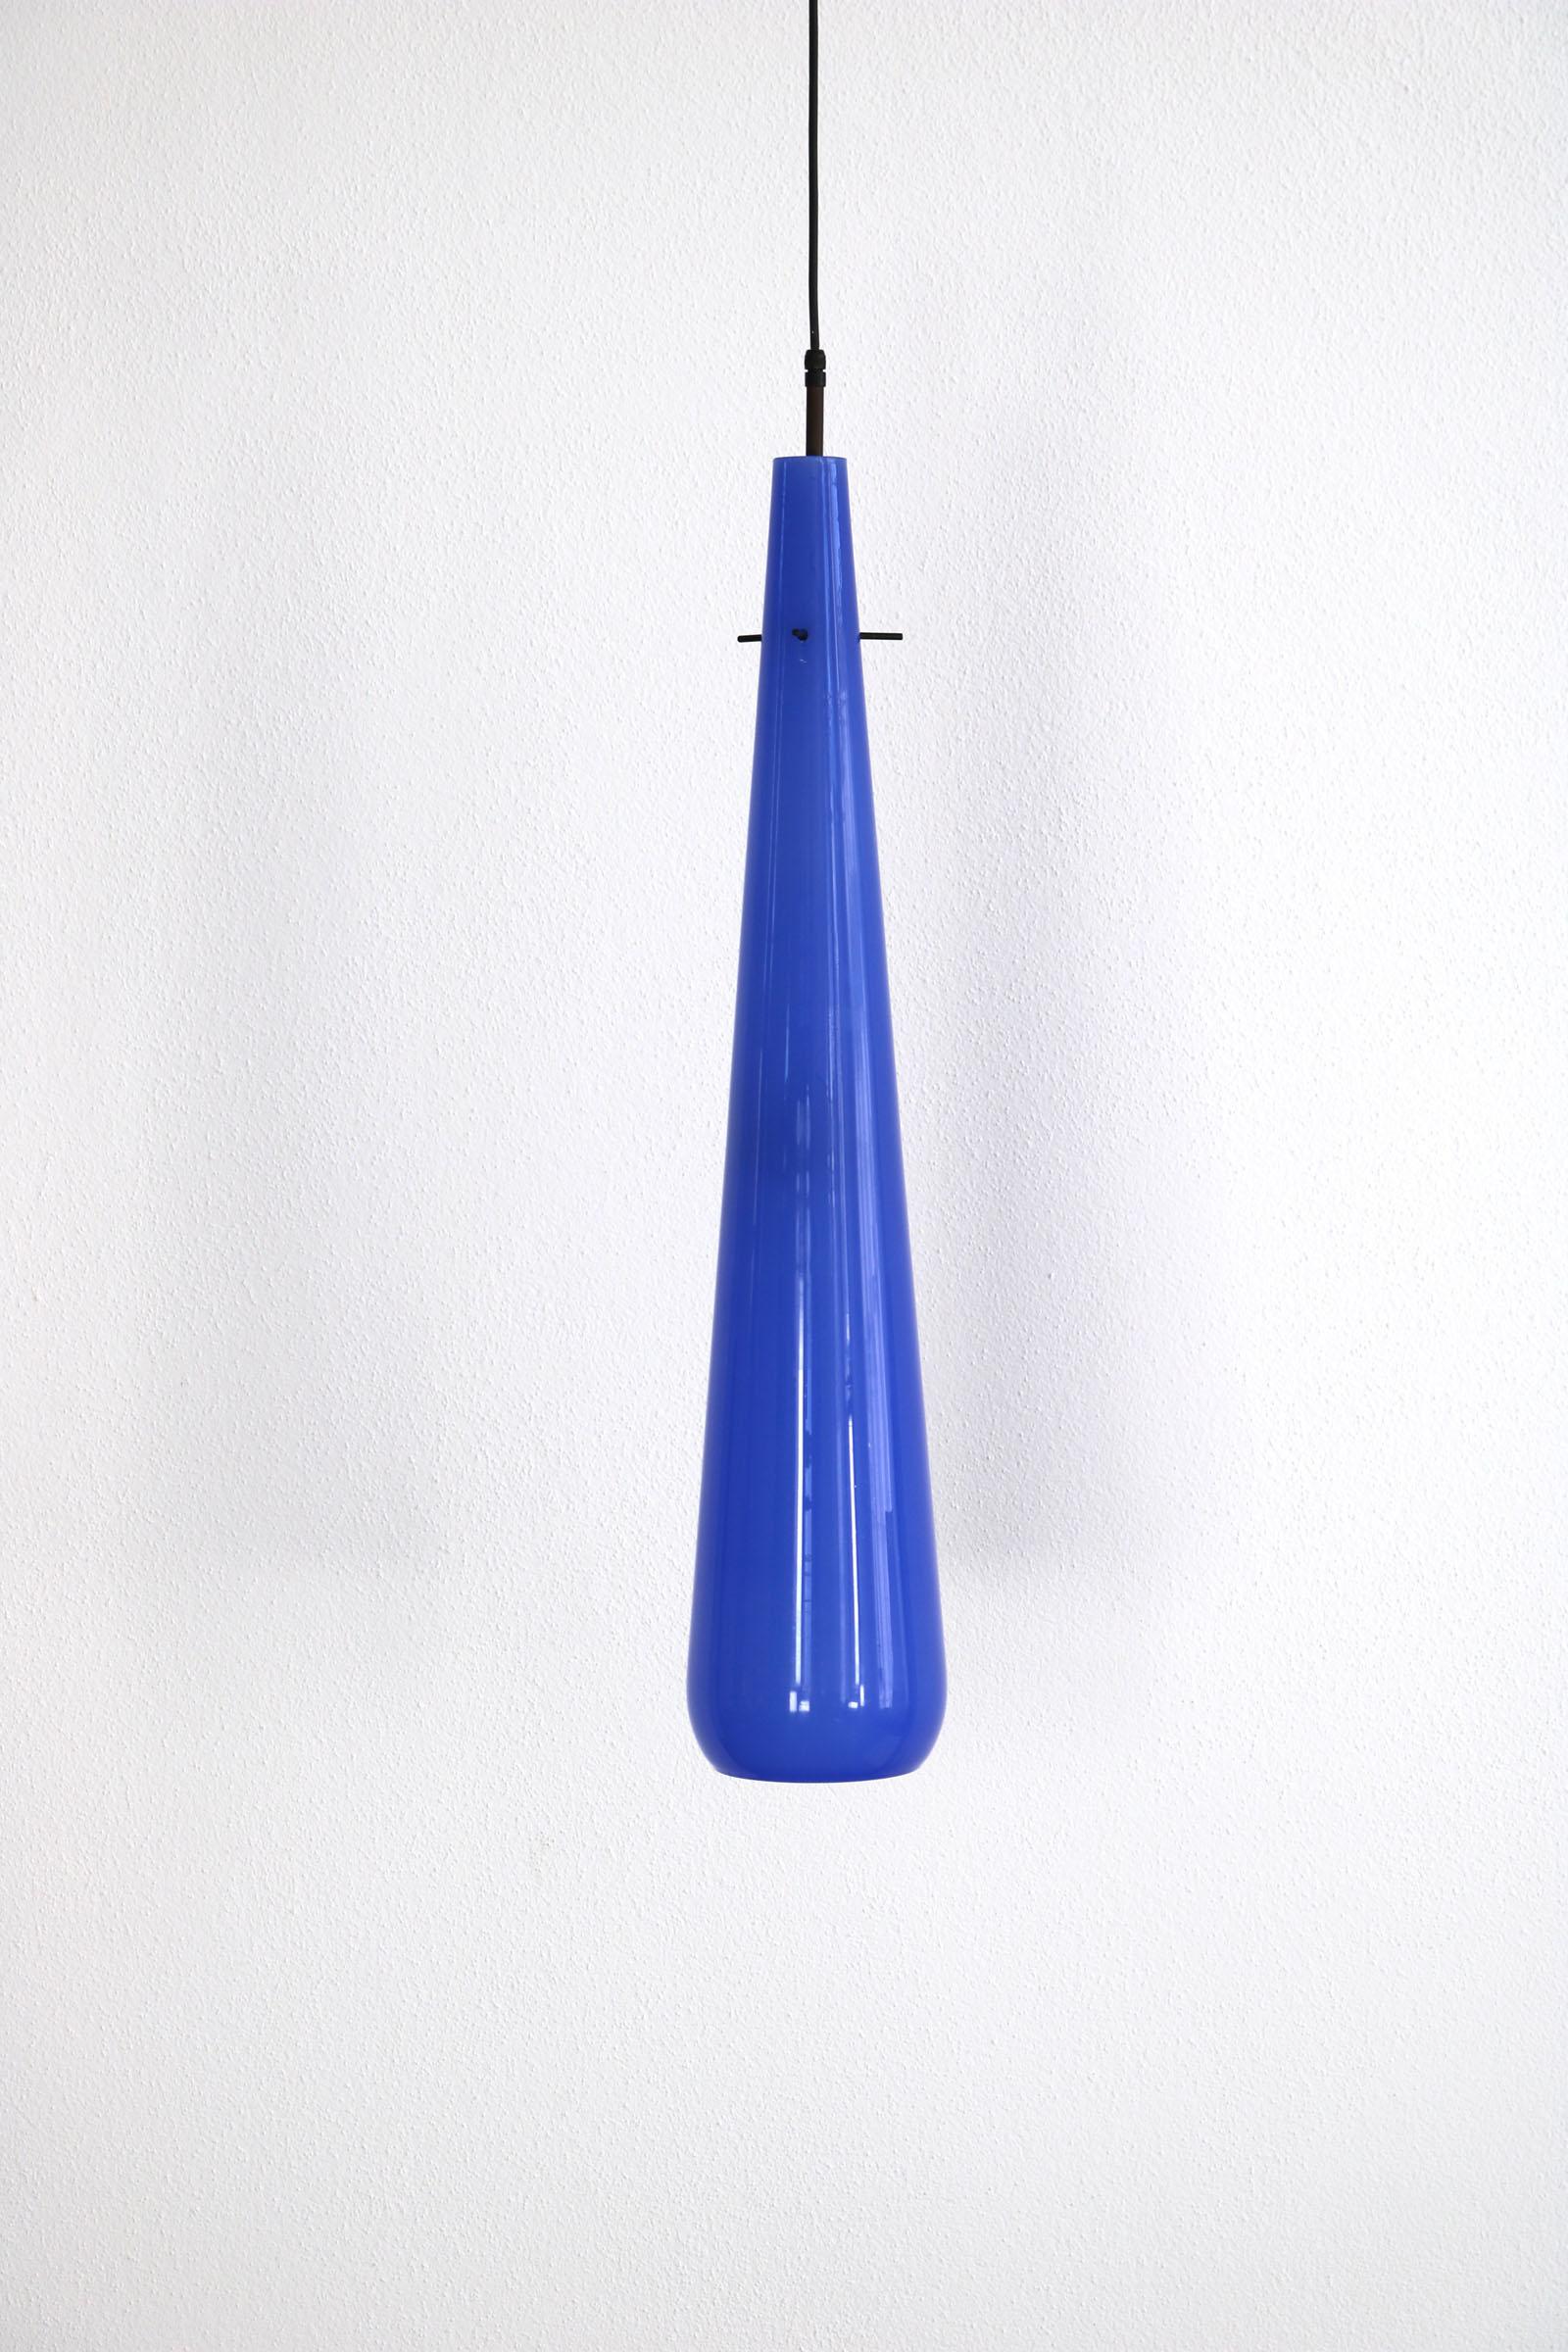 This Italian glass lamp was manufactured by Vistosi in 1950s. It is made of beautiful blue murano glass and hangs tear-shaped from the ceiling. The inside of the lamp is white. The lamp is in good Vinatge condition.